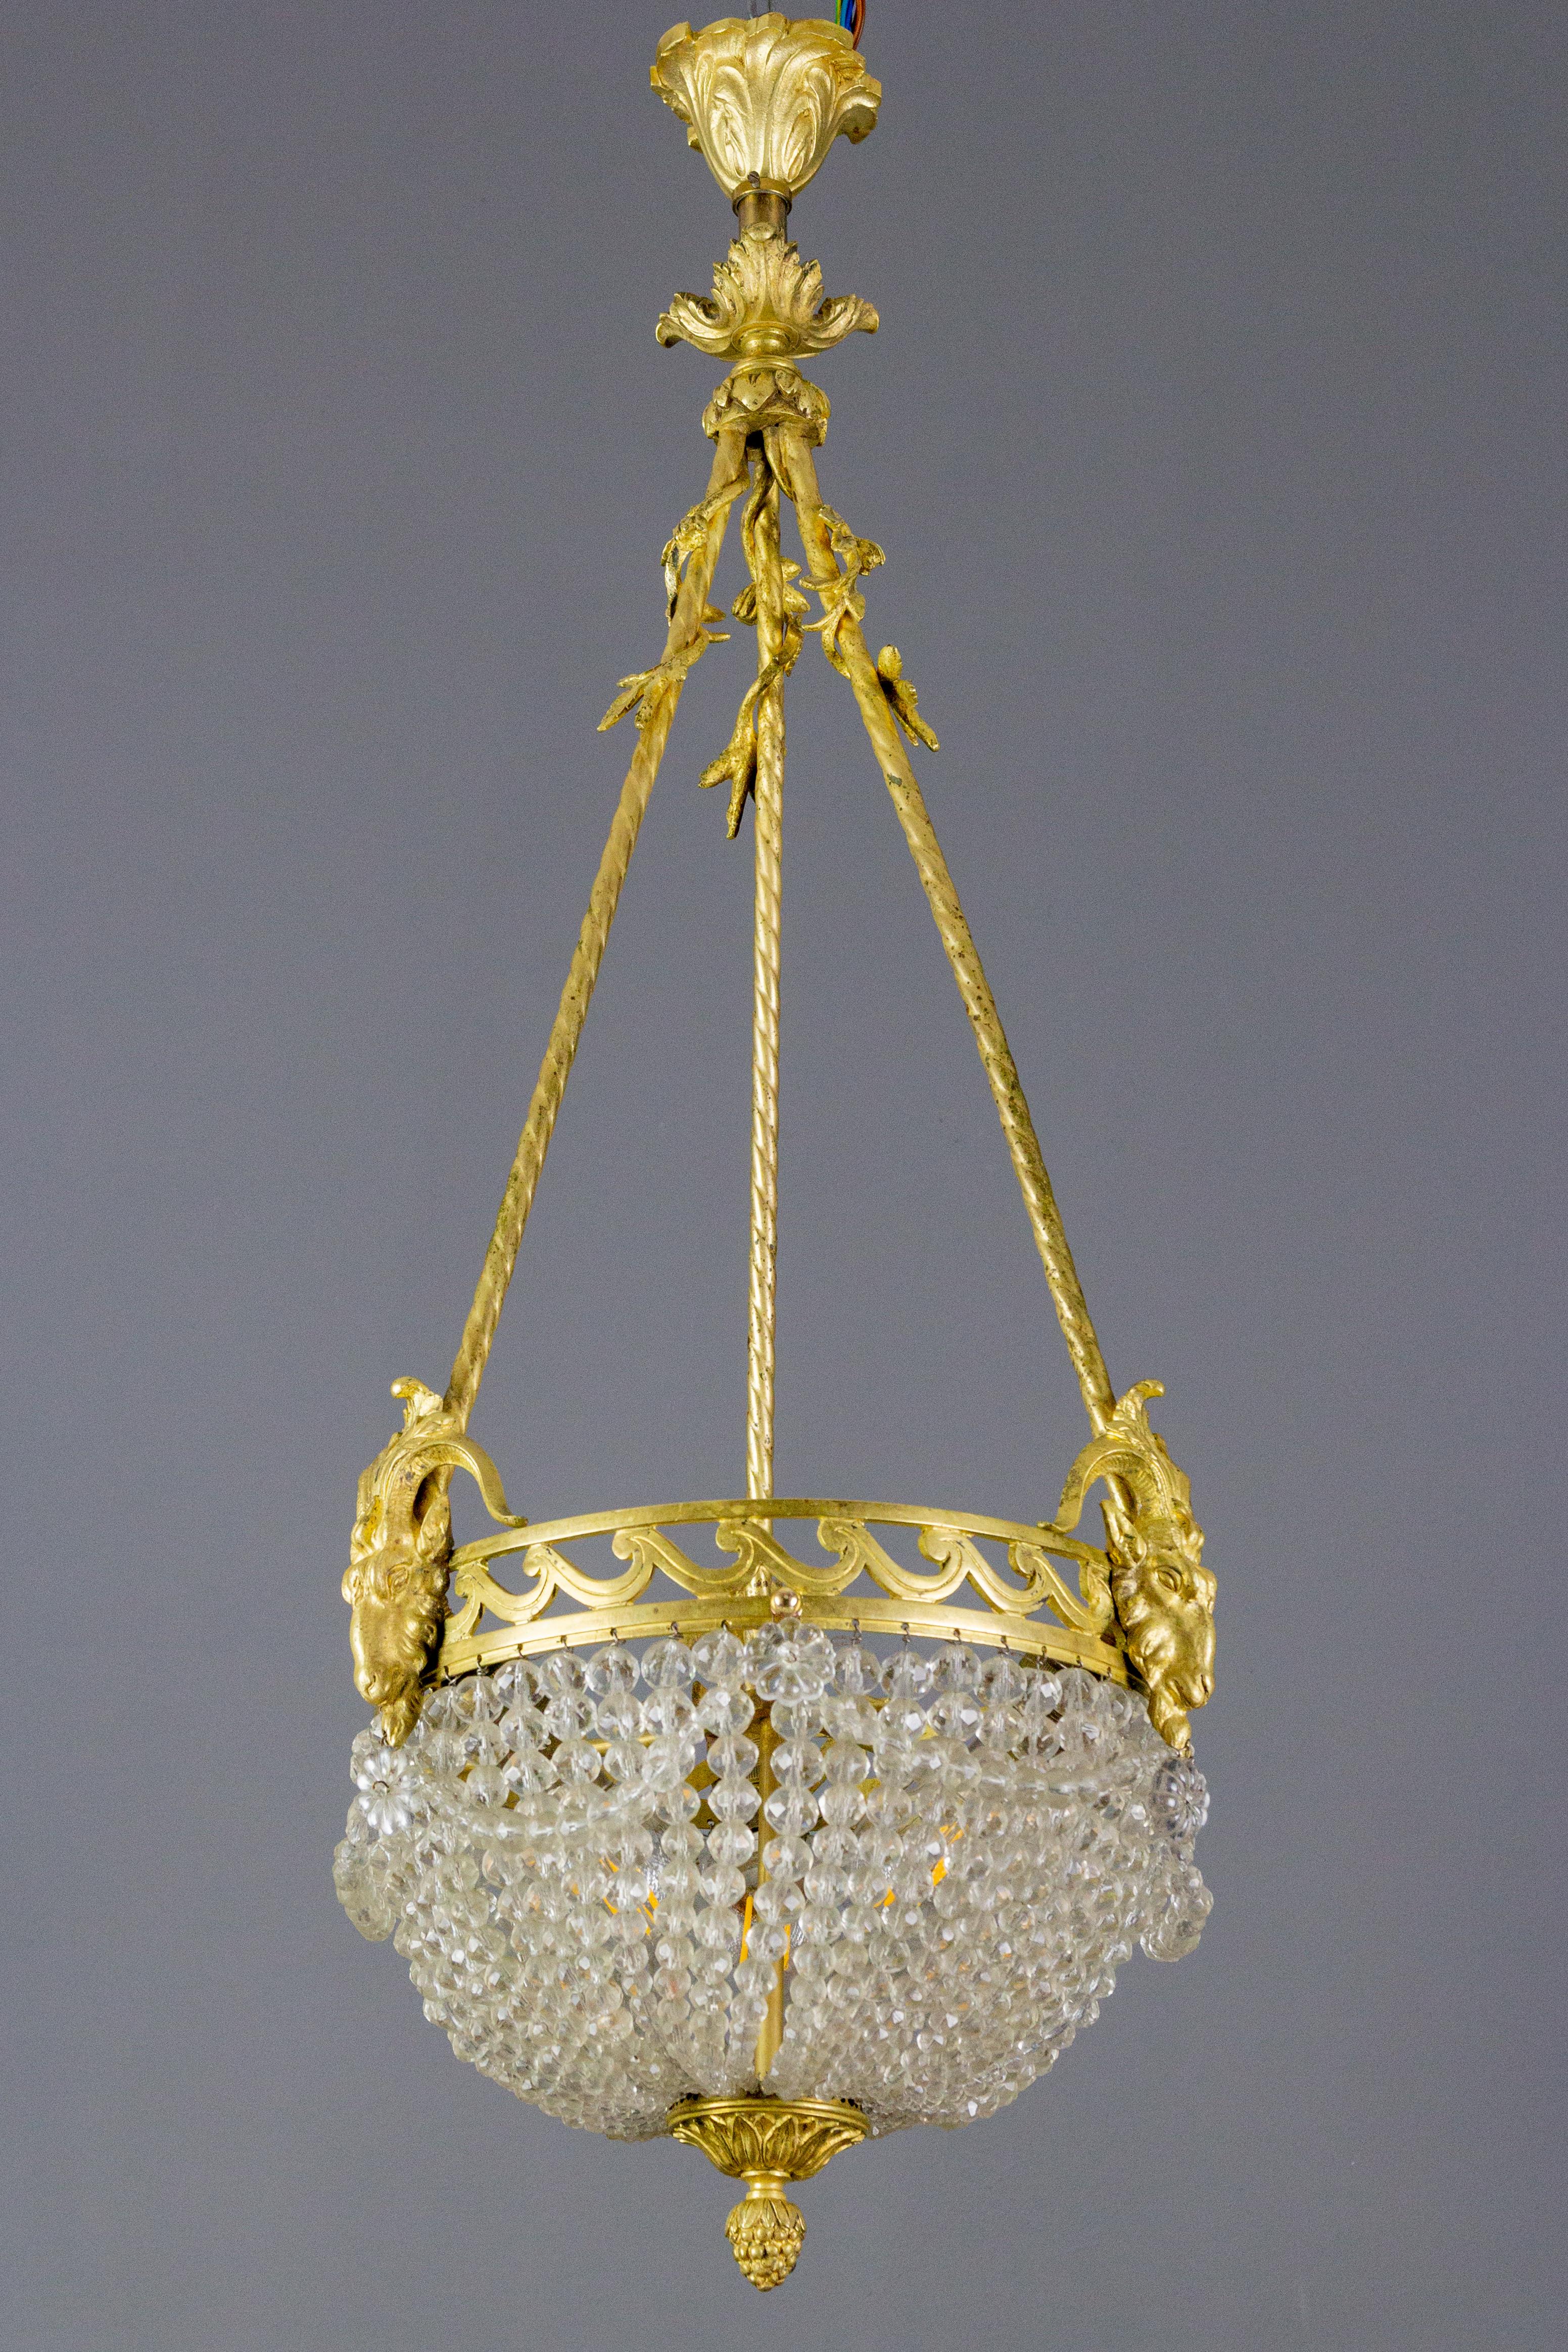 An adorable French Louis XVI style chandelier from the 1920th. The central lighting cluster is surrounded by beautiful beaded crystal garlands and an elegant rim with three ram's heads and suspended by three bronze ropes, which are decorated with